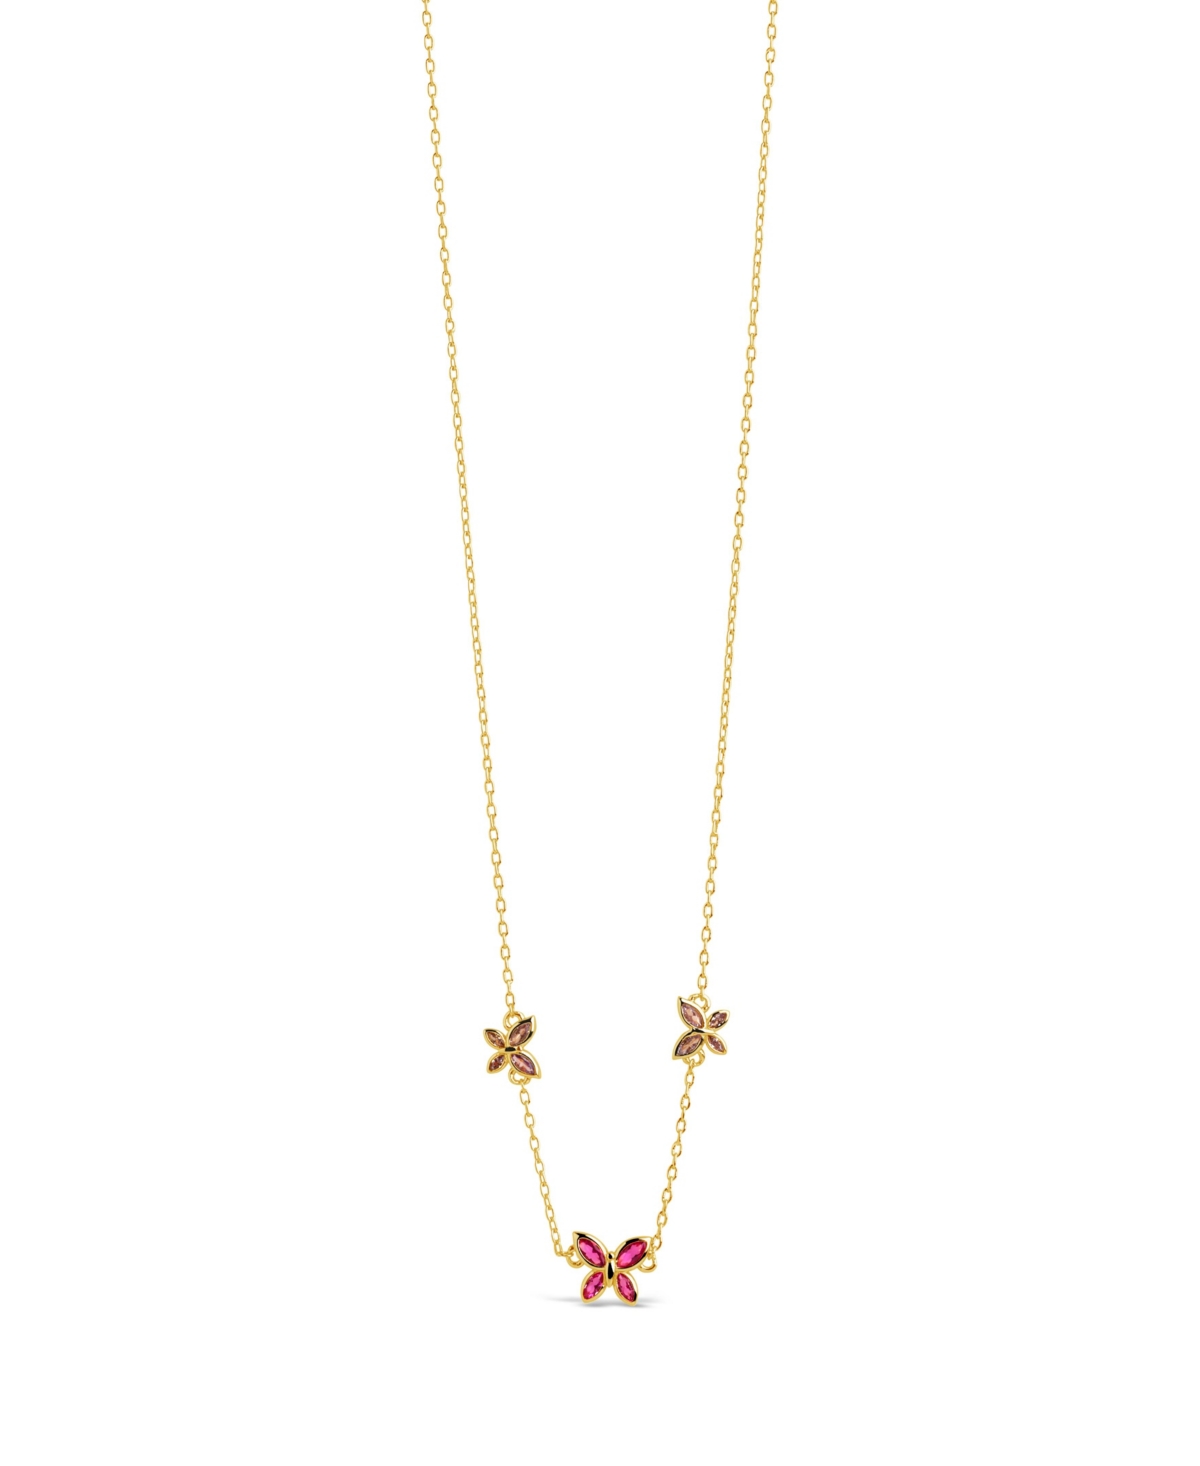 Shop Sterling Forever Silver-tone Or Gold-tone Pink Cubic Zirconia Butterfly Charm Caria Necklace